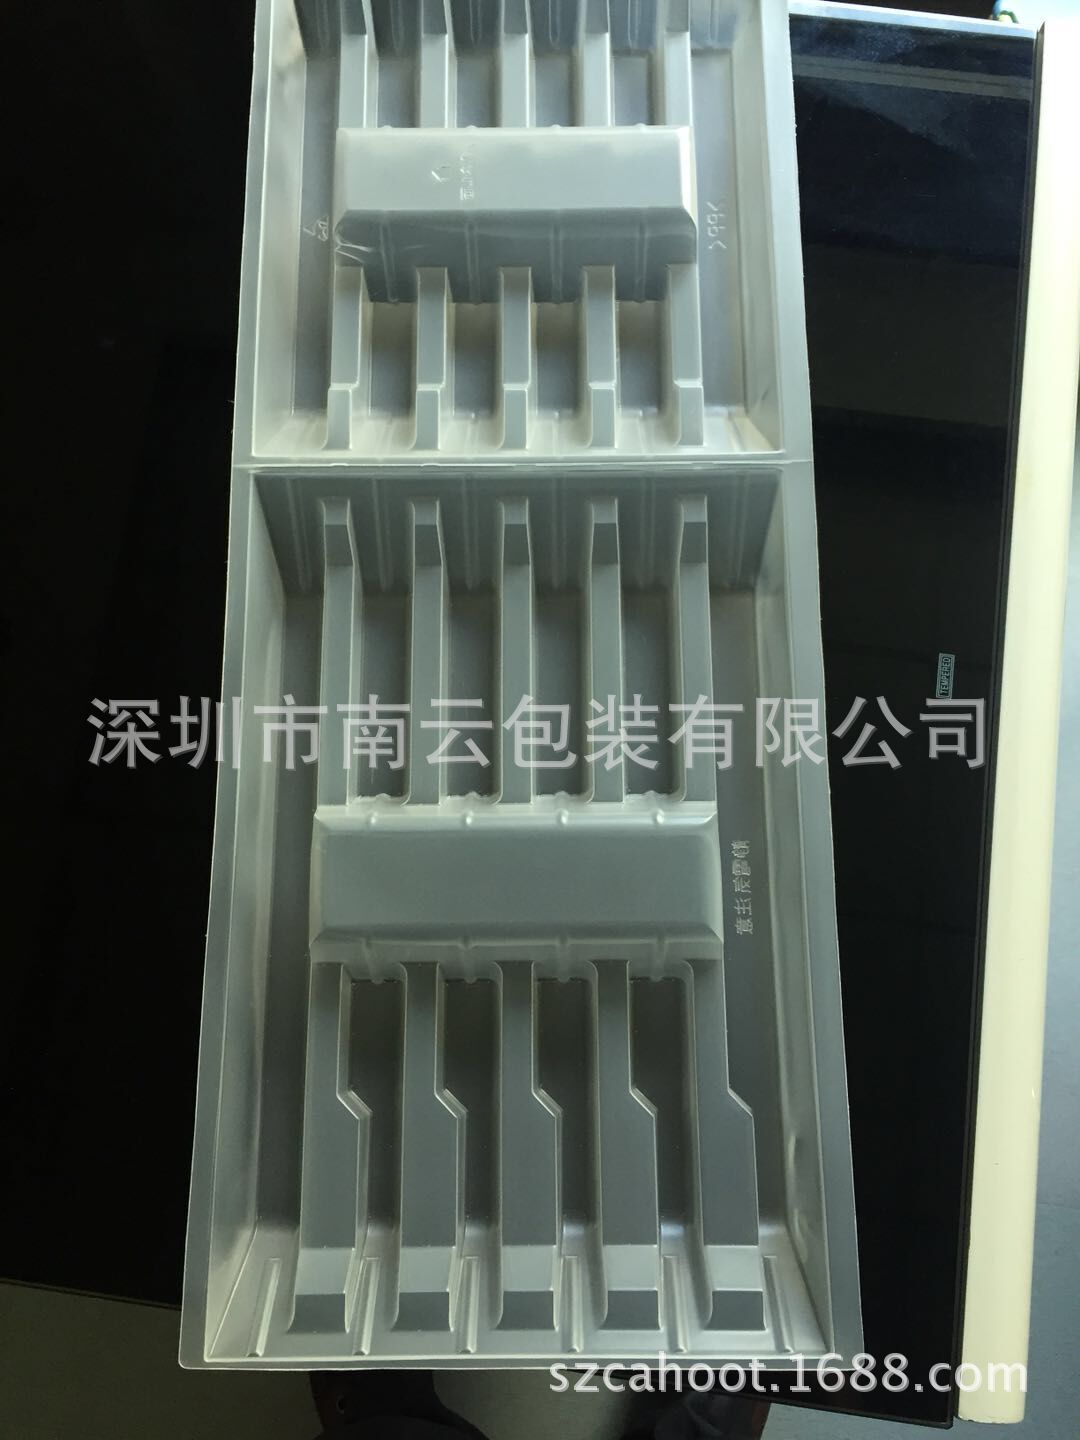 Supply for industrial use LCD Display special PP Blister Tray Shenzhen Blister packing Manager recommend